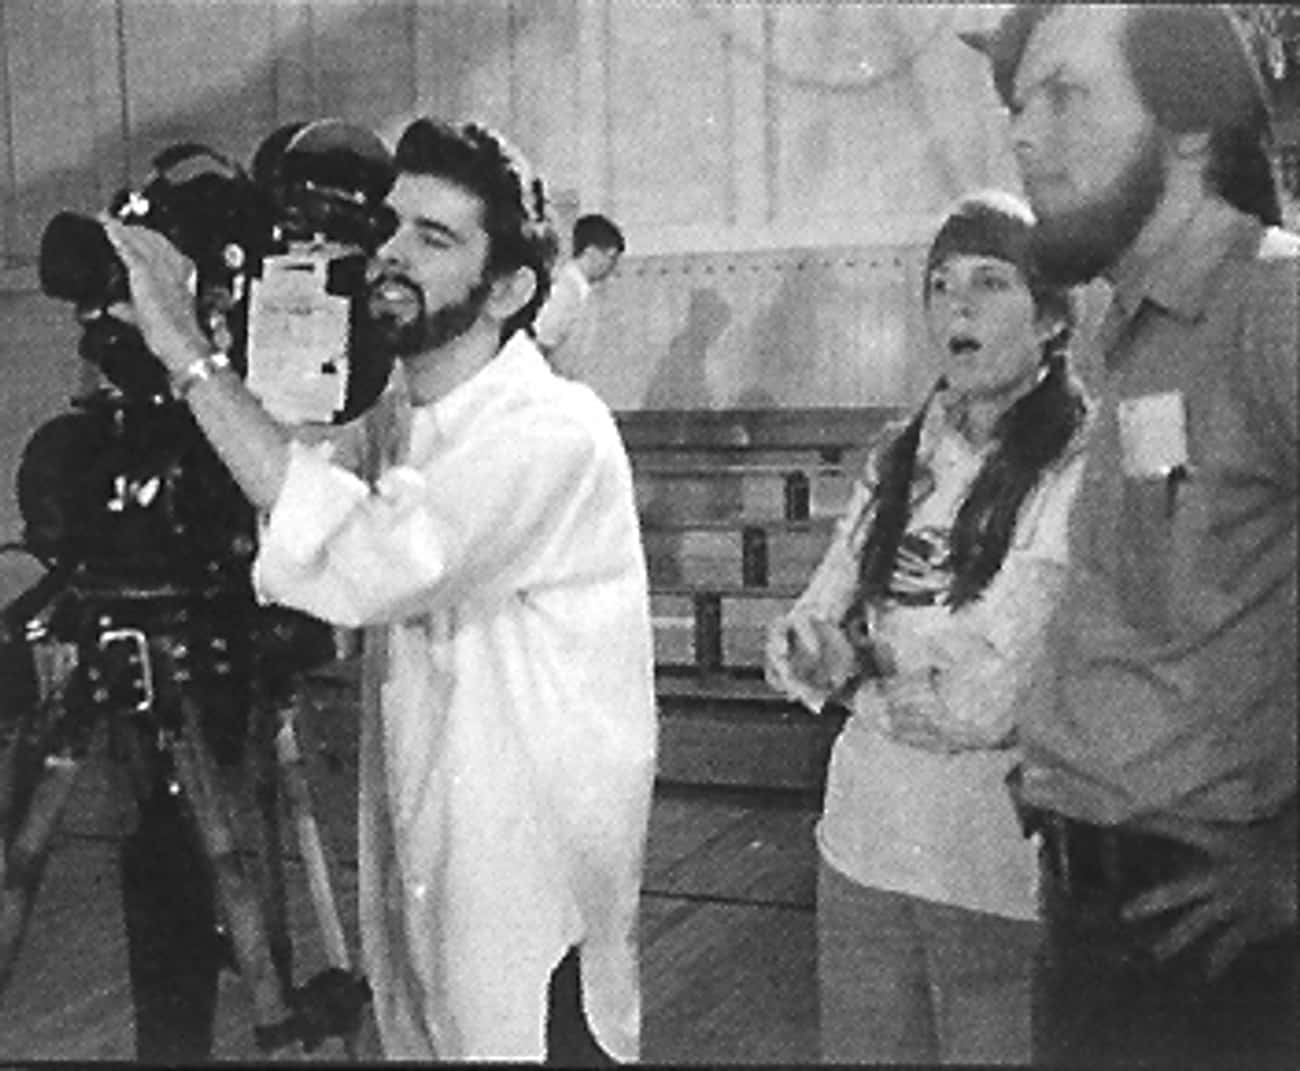 Young George Lucas in Long White Shirt with Camera